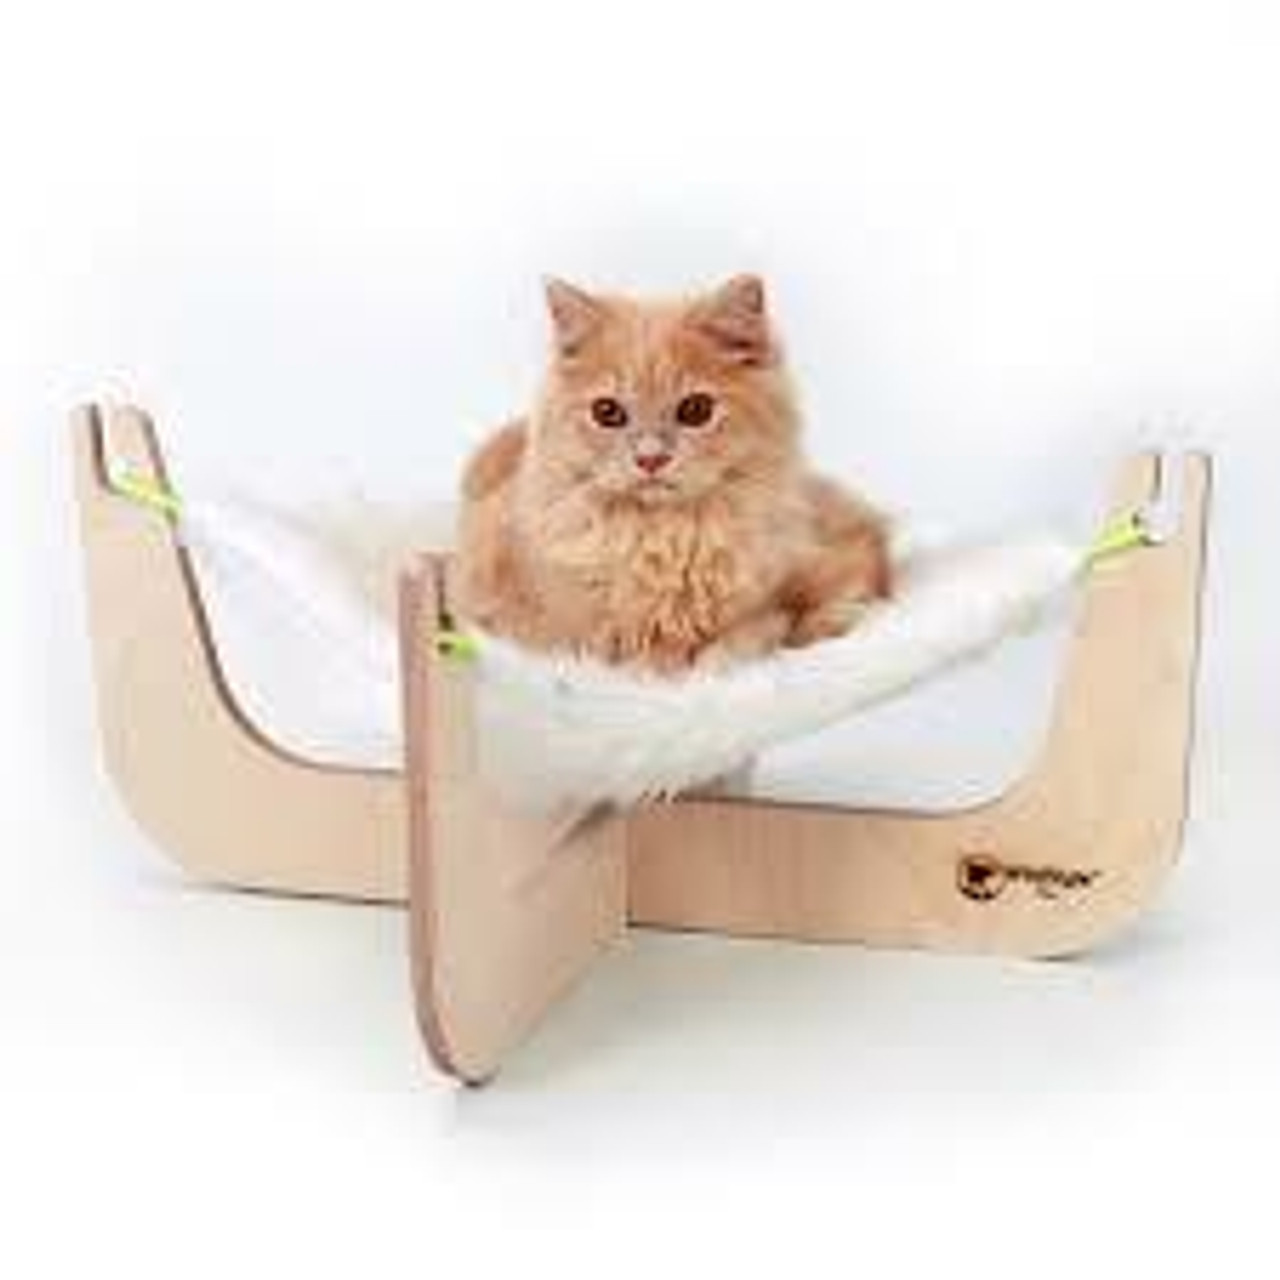 Elevated Bed